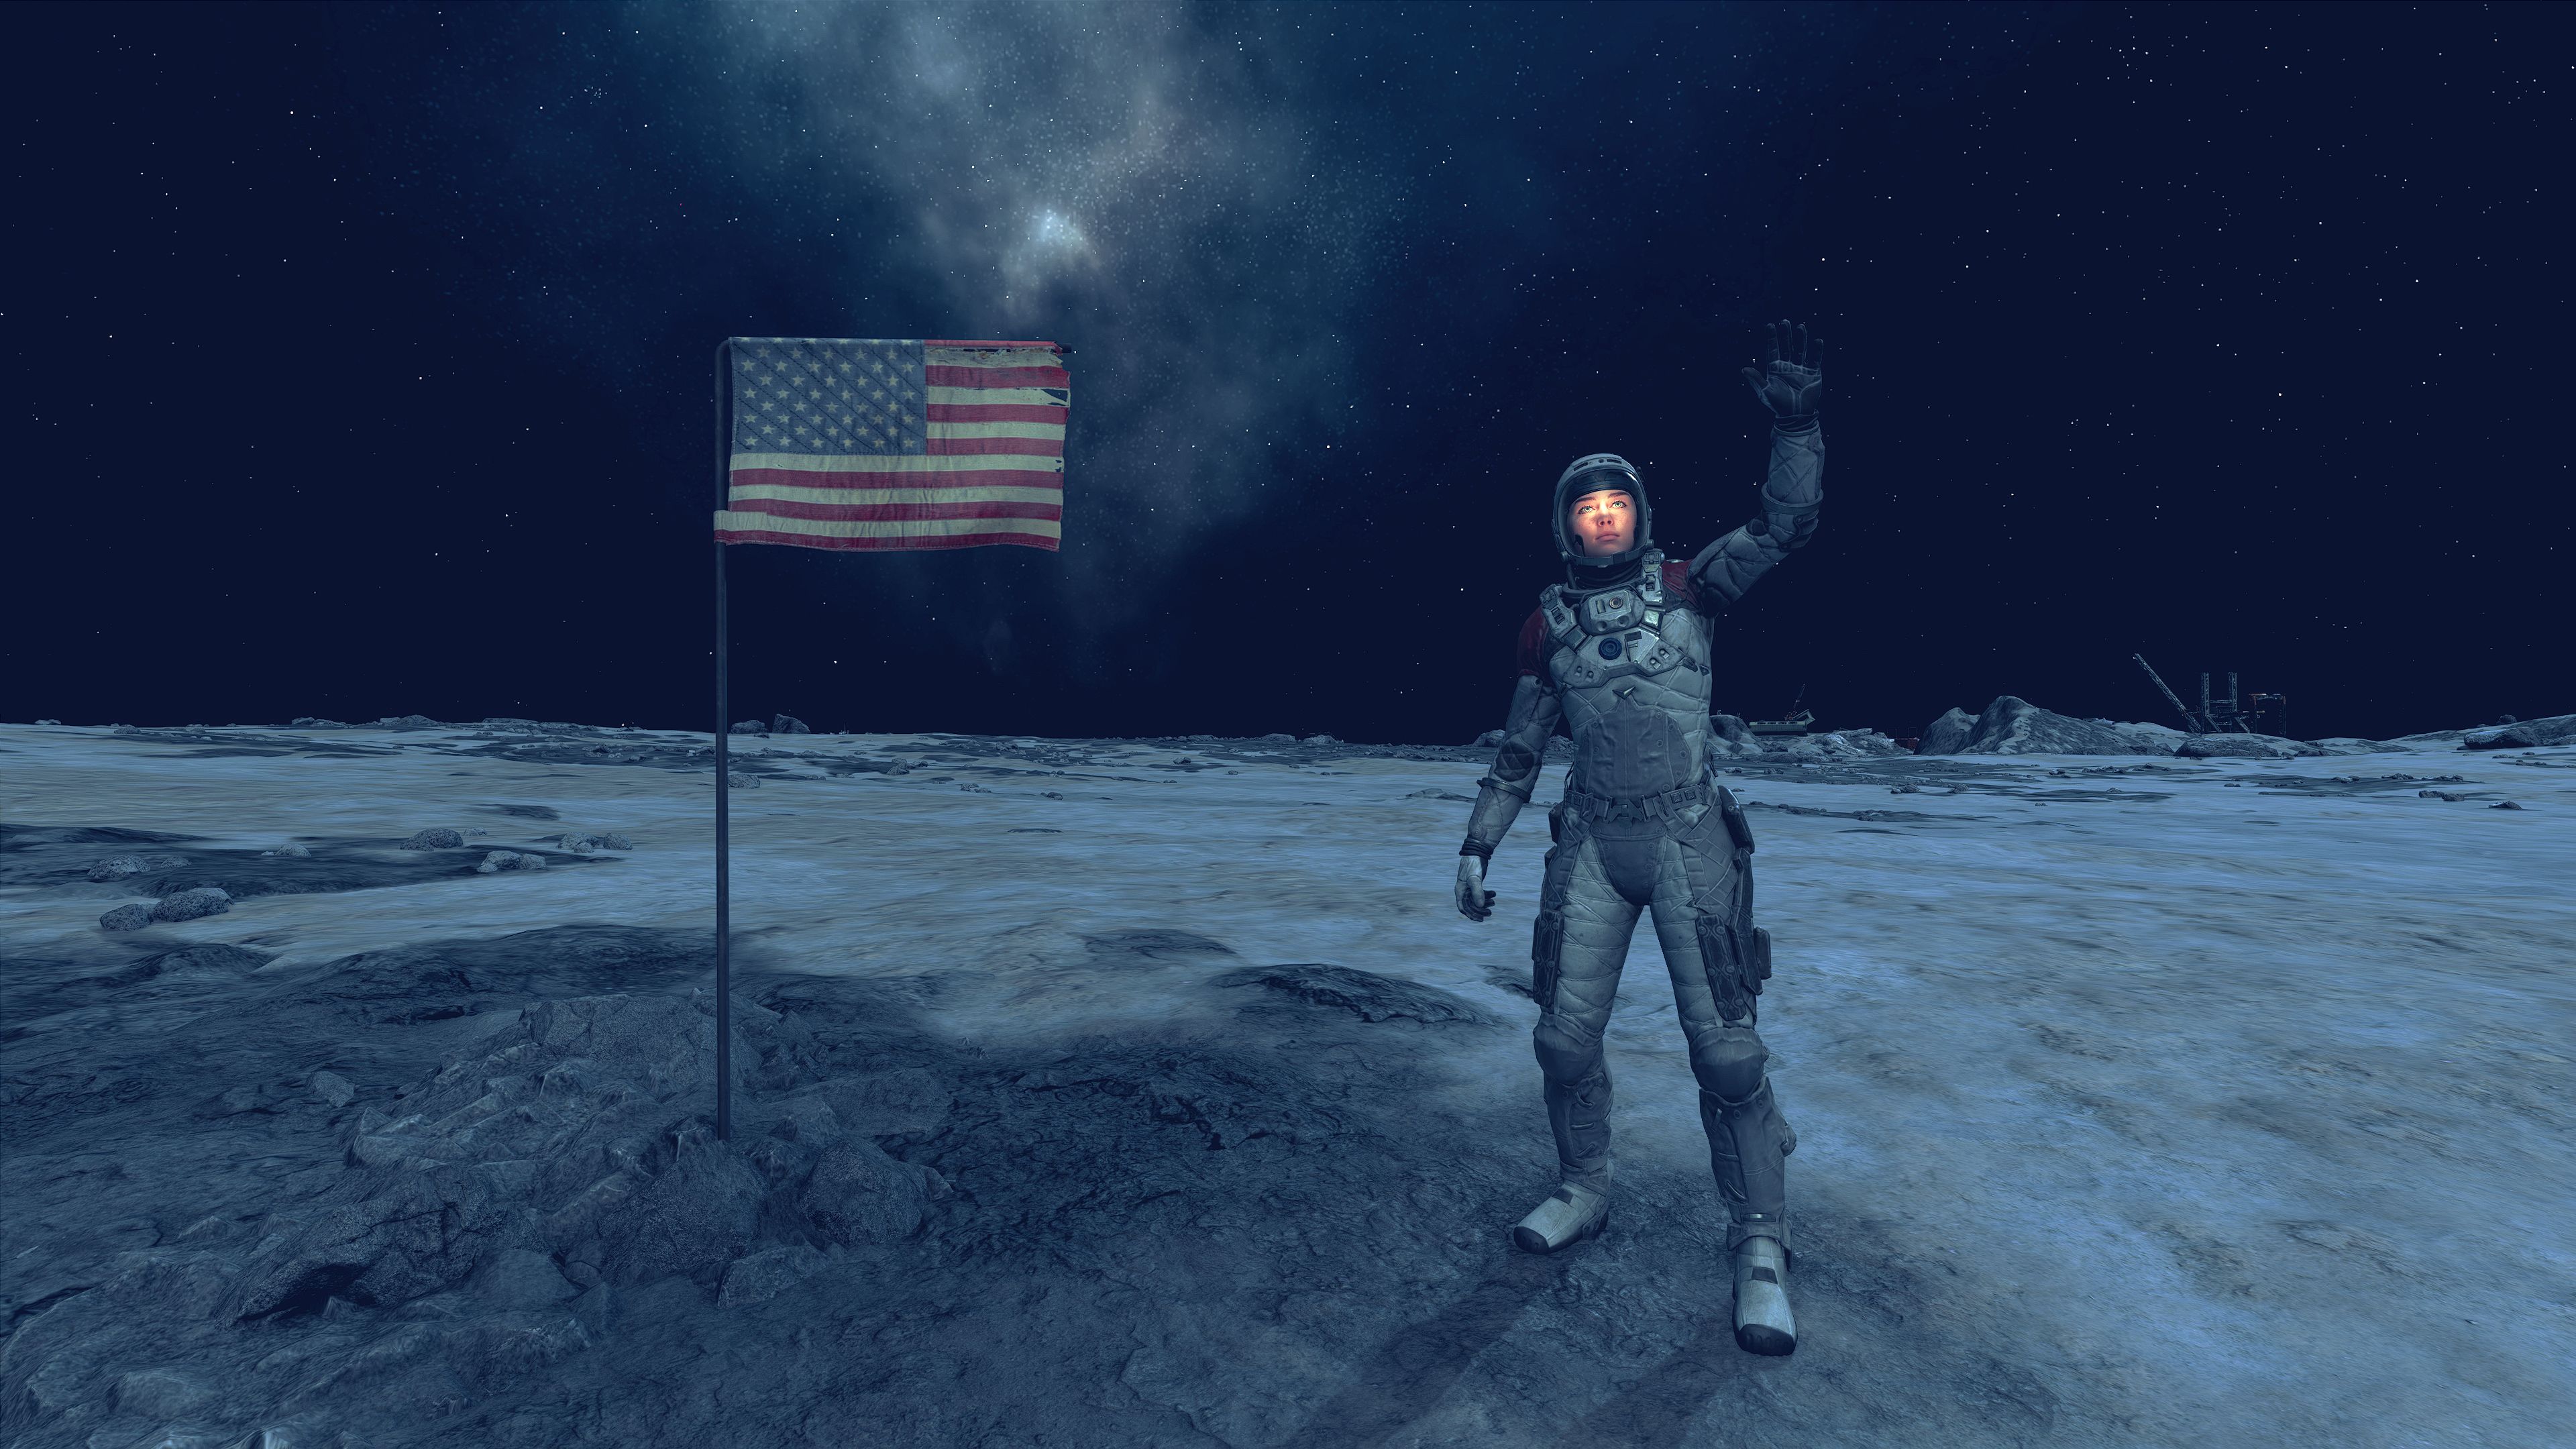 Starfield Player Wearing Mark 1 Constellation Spacesuit Armor Set Waving Near American Flag On Moon